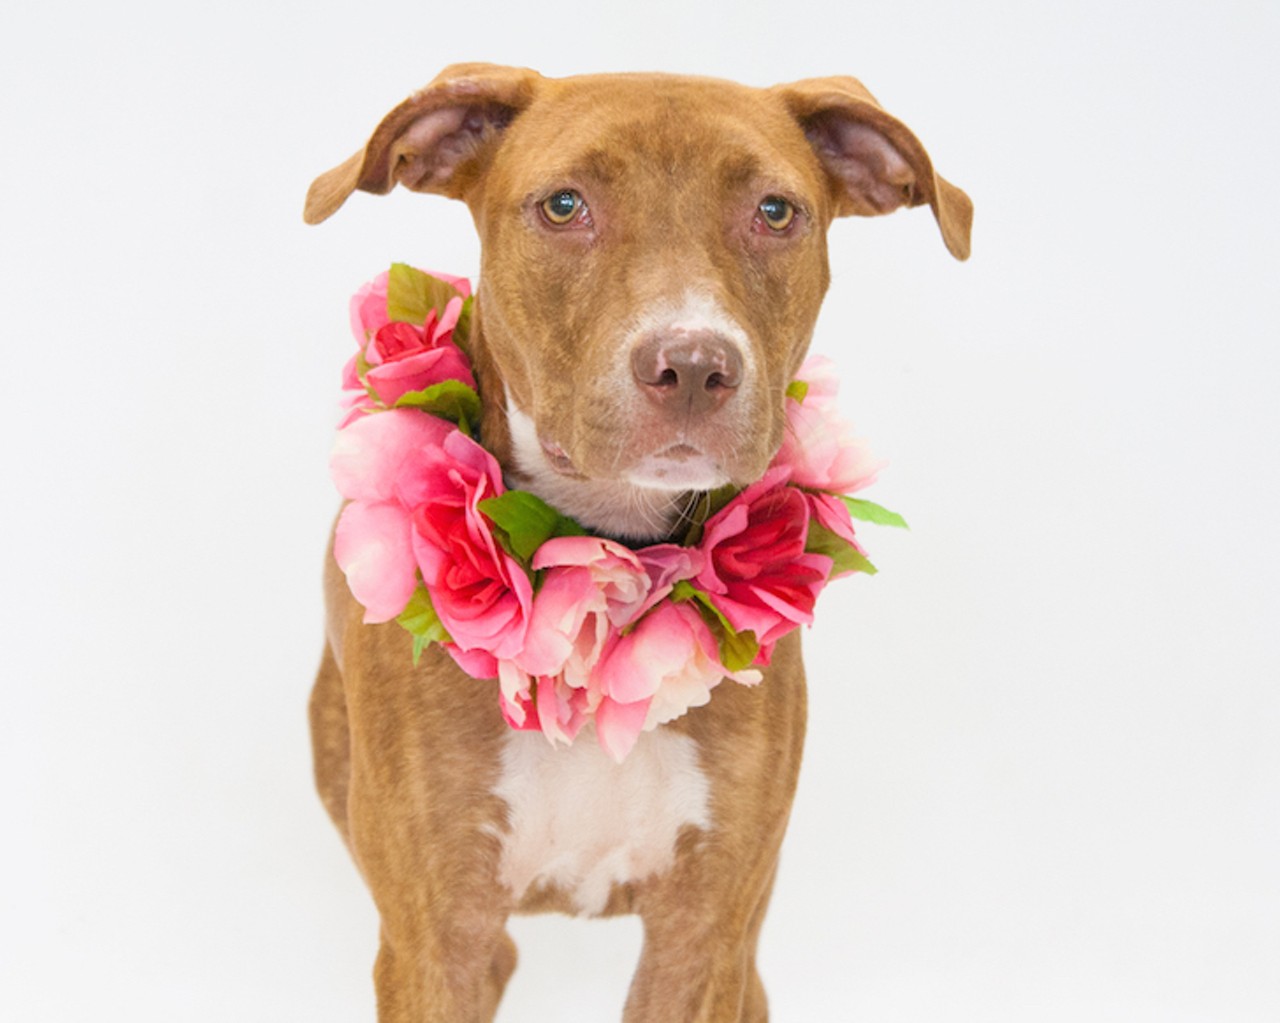 16 adoptable pooches looking for a new home right now